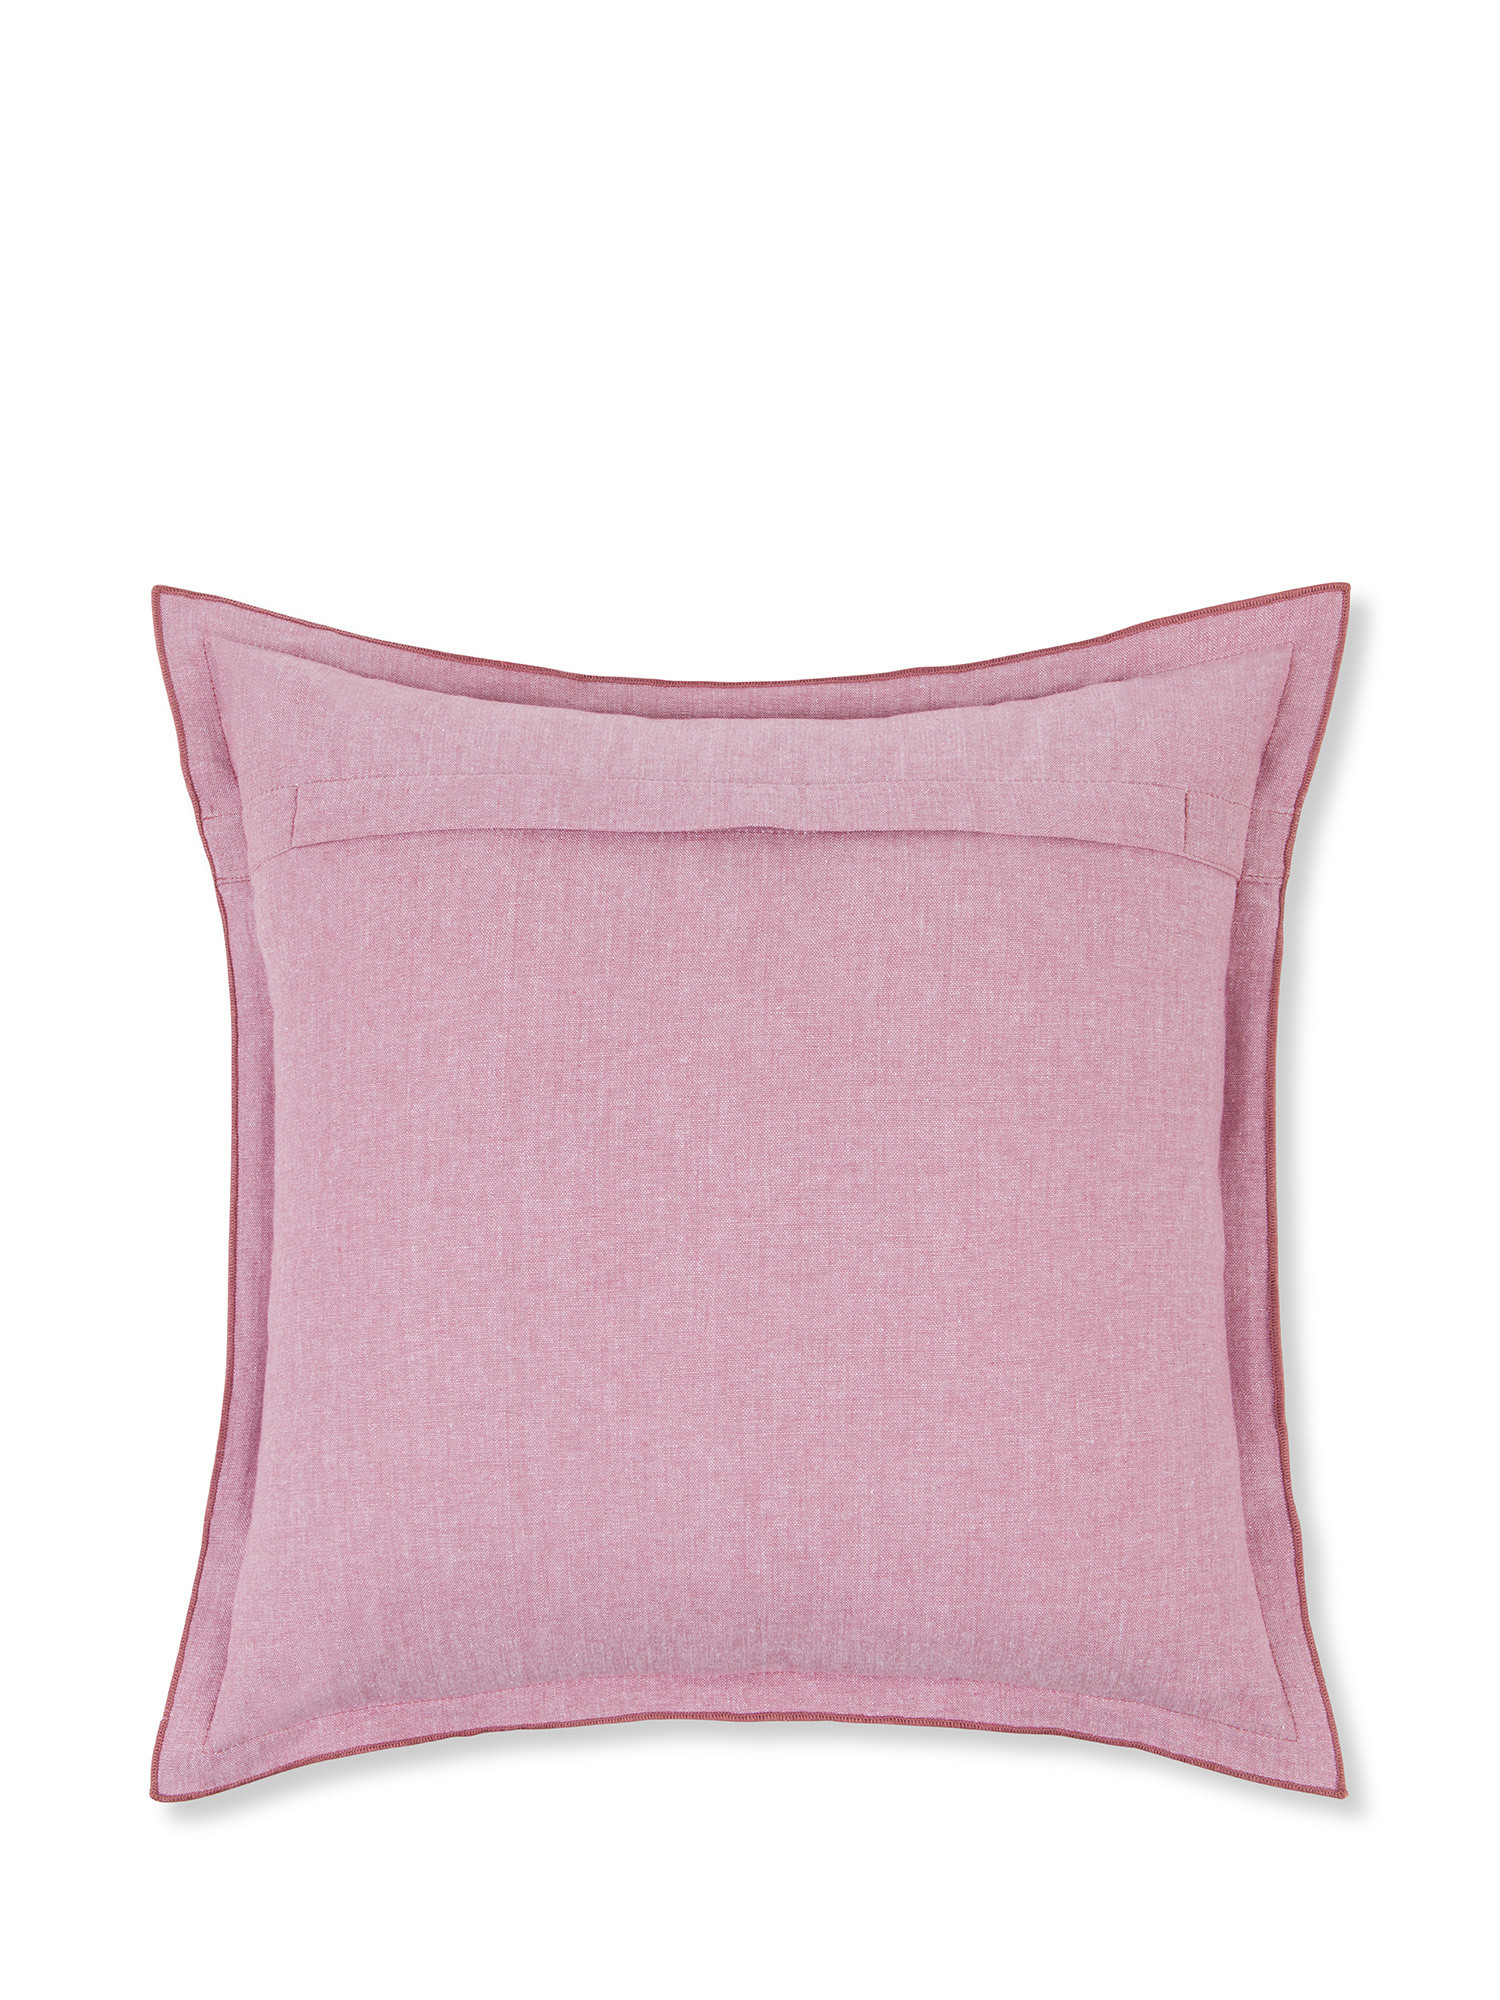 Chambray cotton cushion 45x45cm, Pink, large image number 1